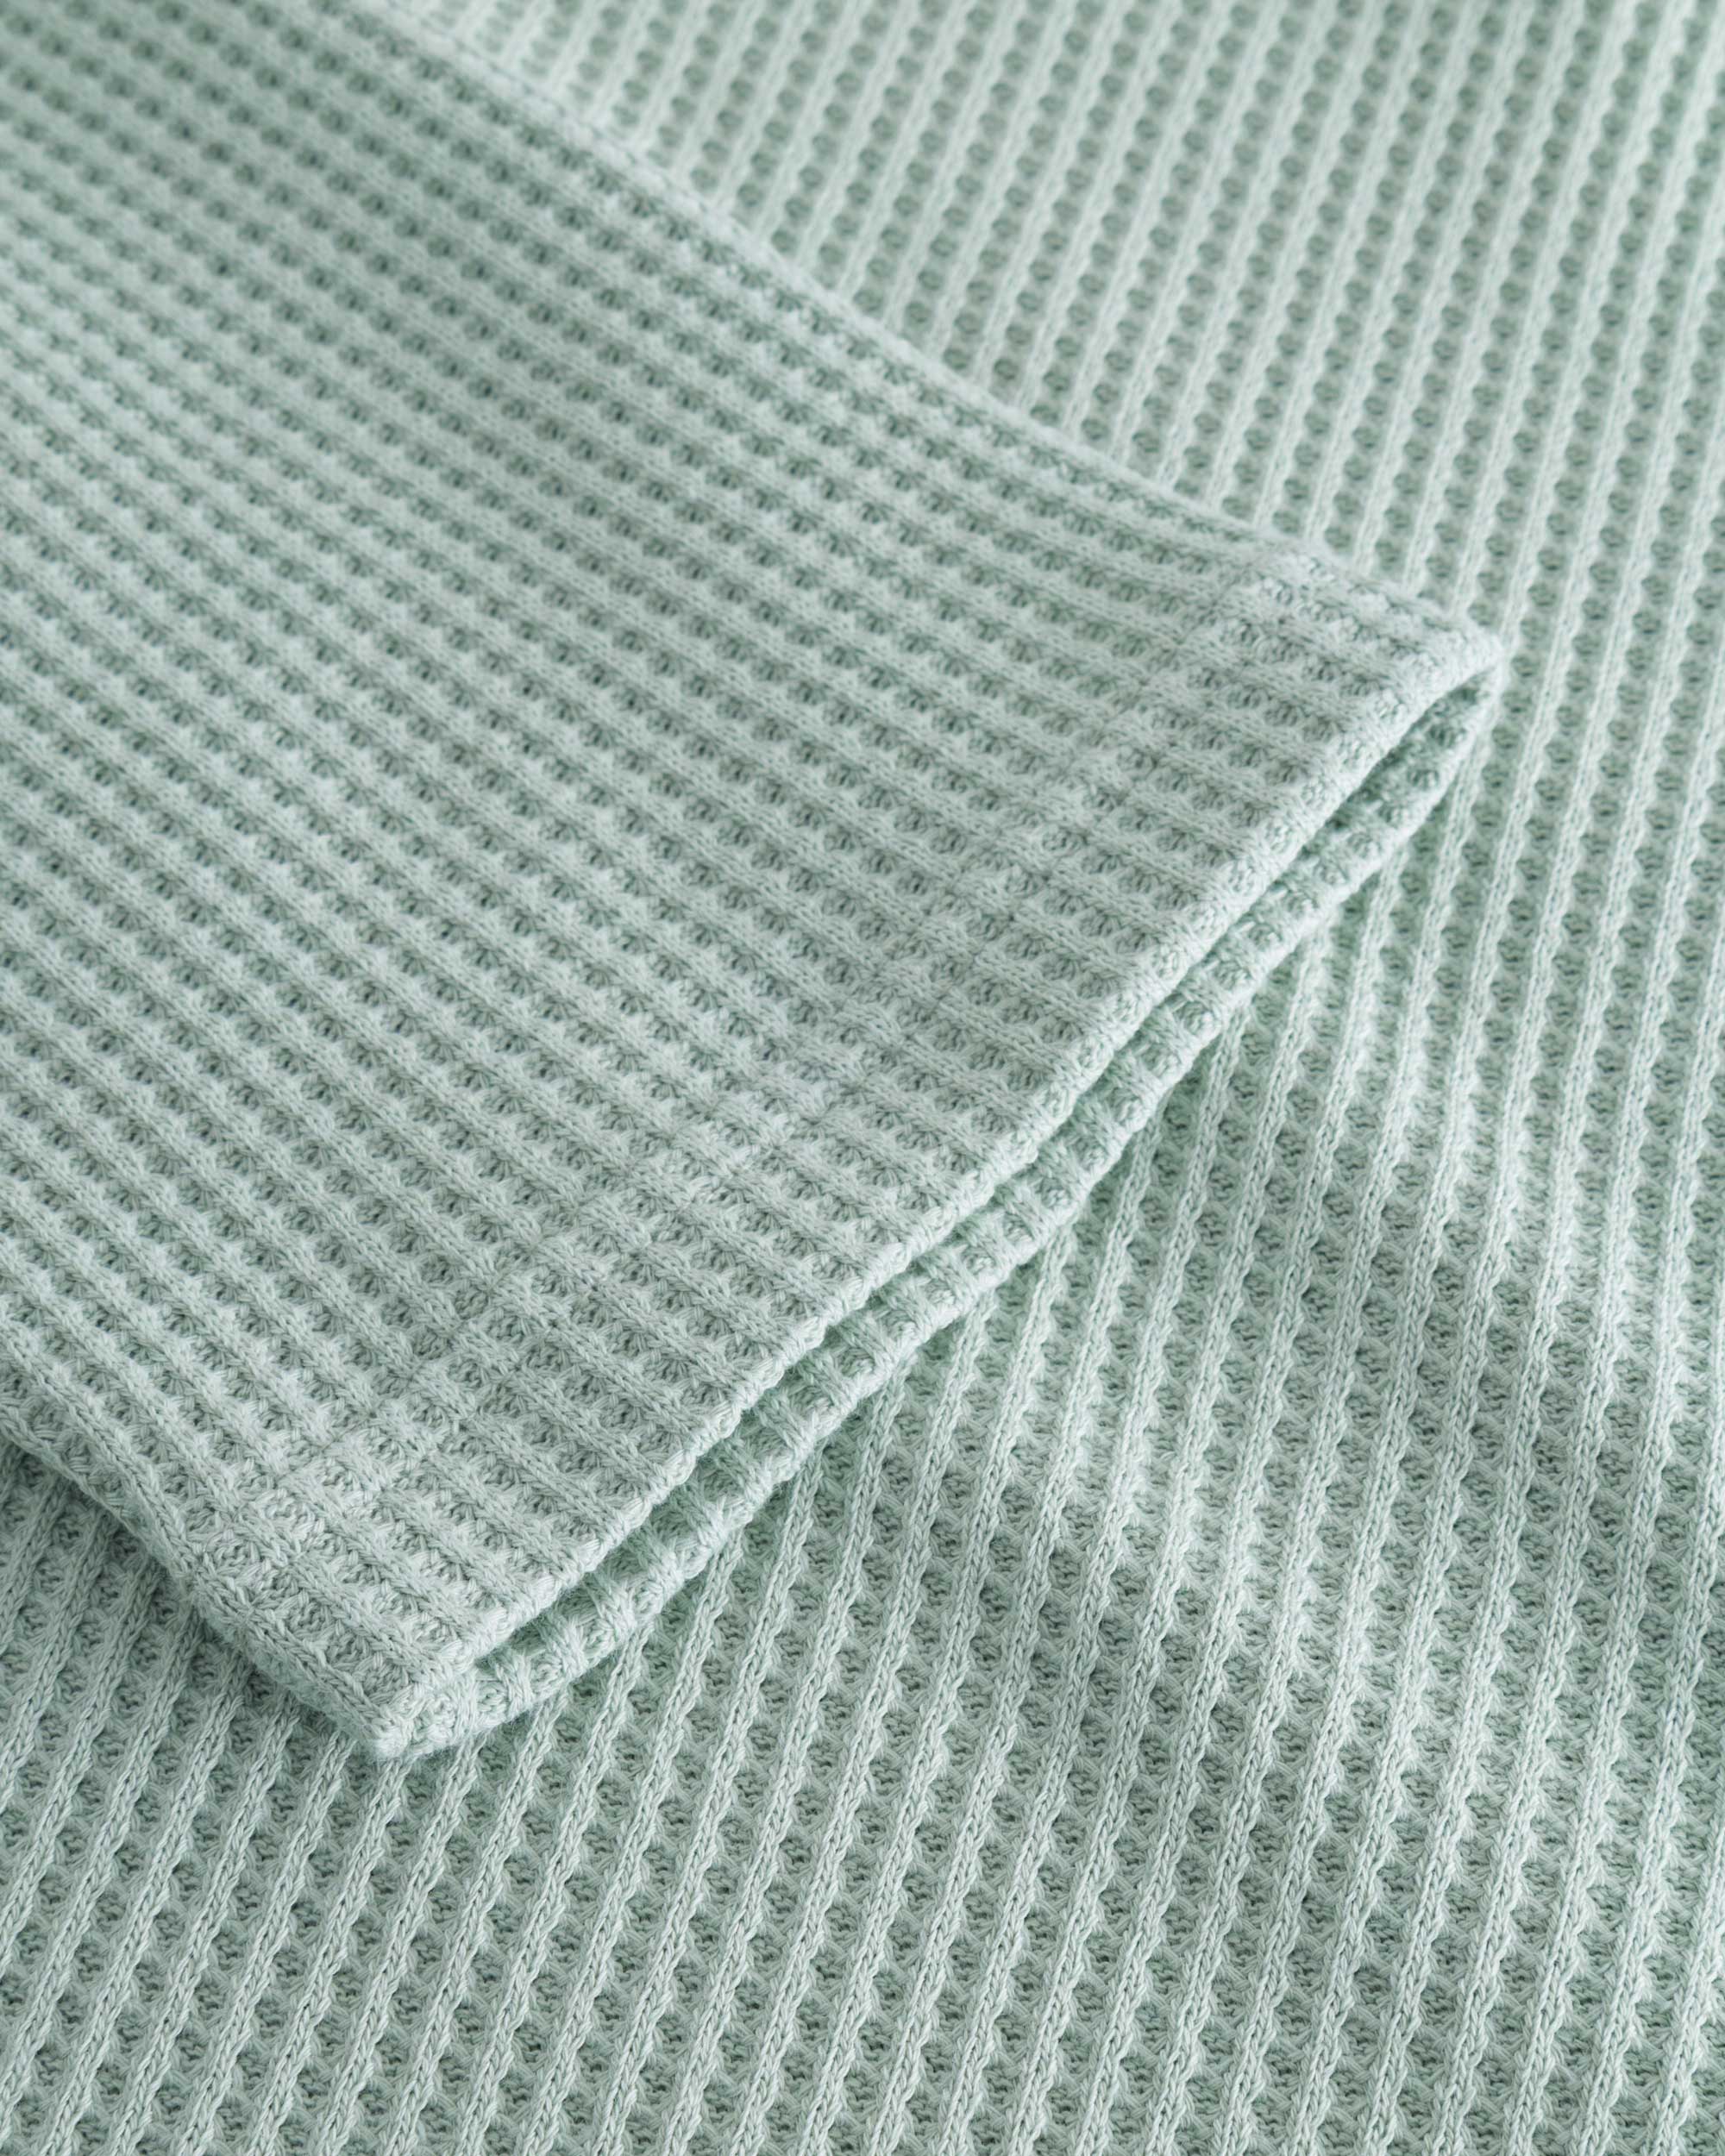 Close up on stitchings and sleeve on a mint green waffle-patterned cropped sweatshirt